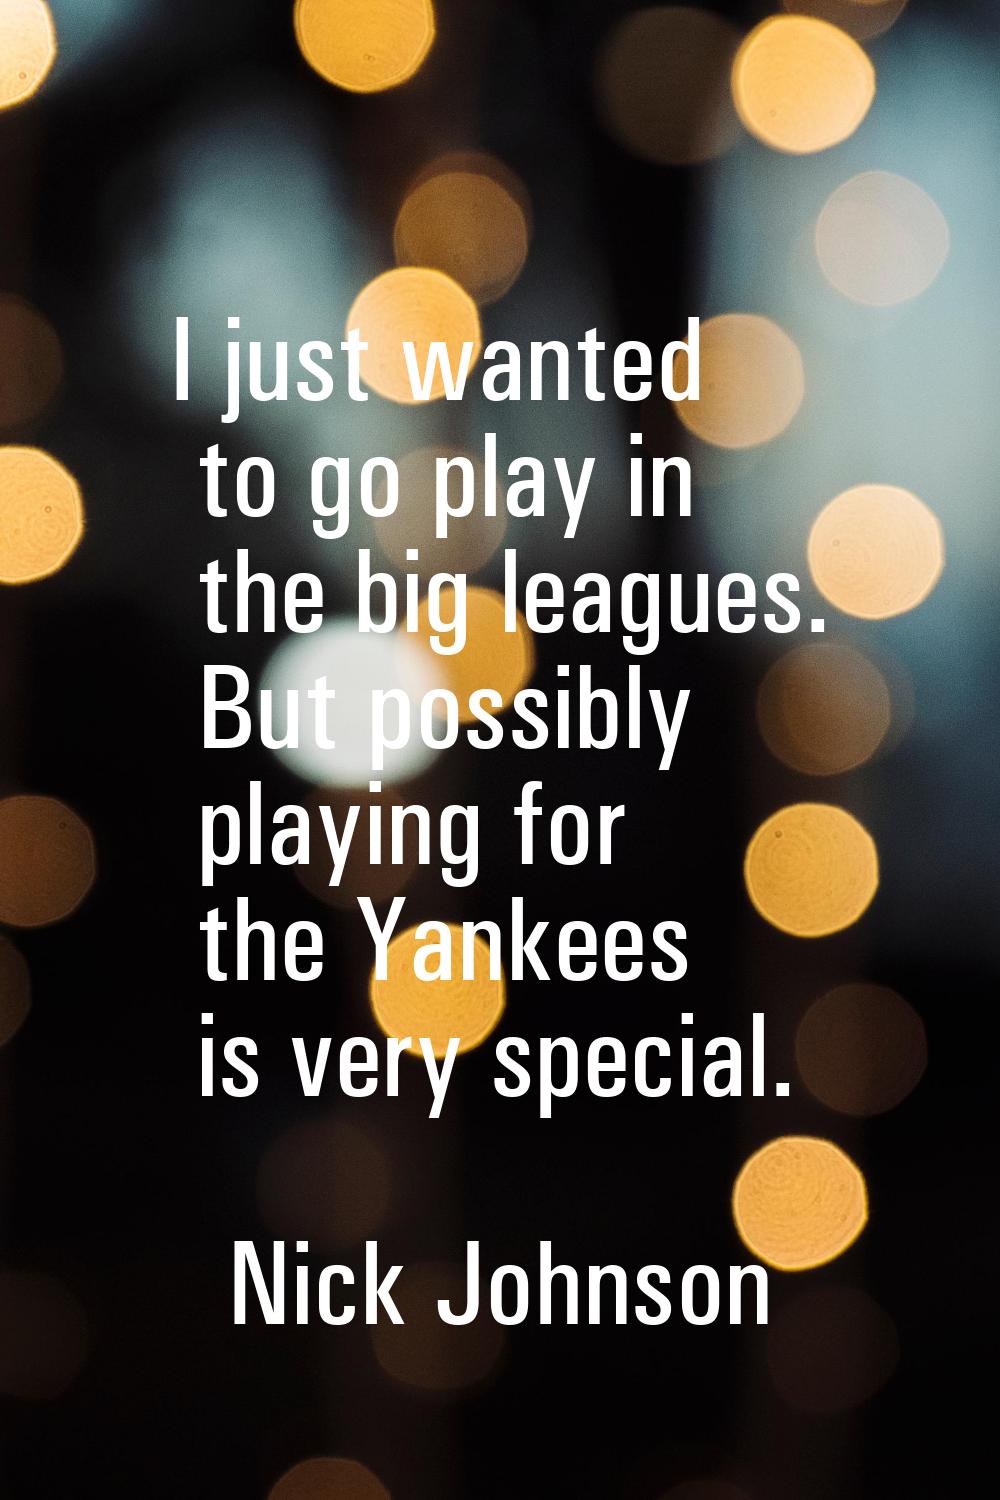 I just wanted to go play in the big leagues. But possibly playing for the Yankees is very special.